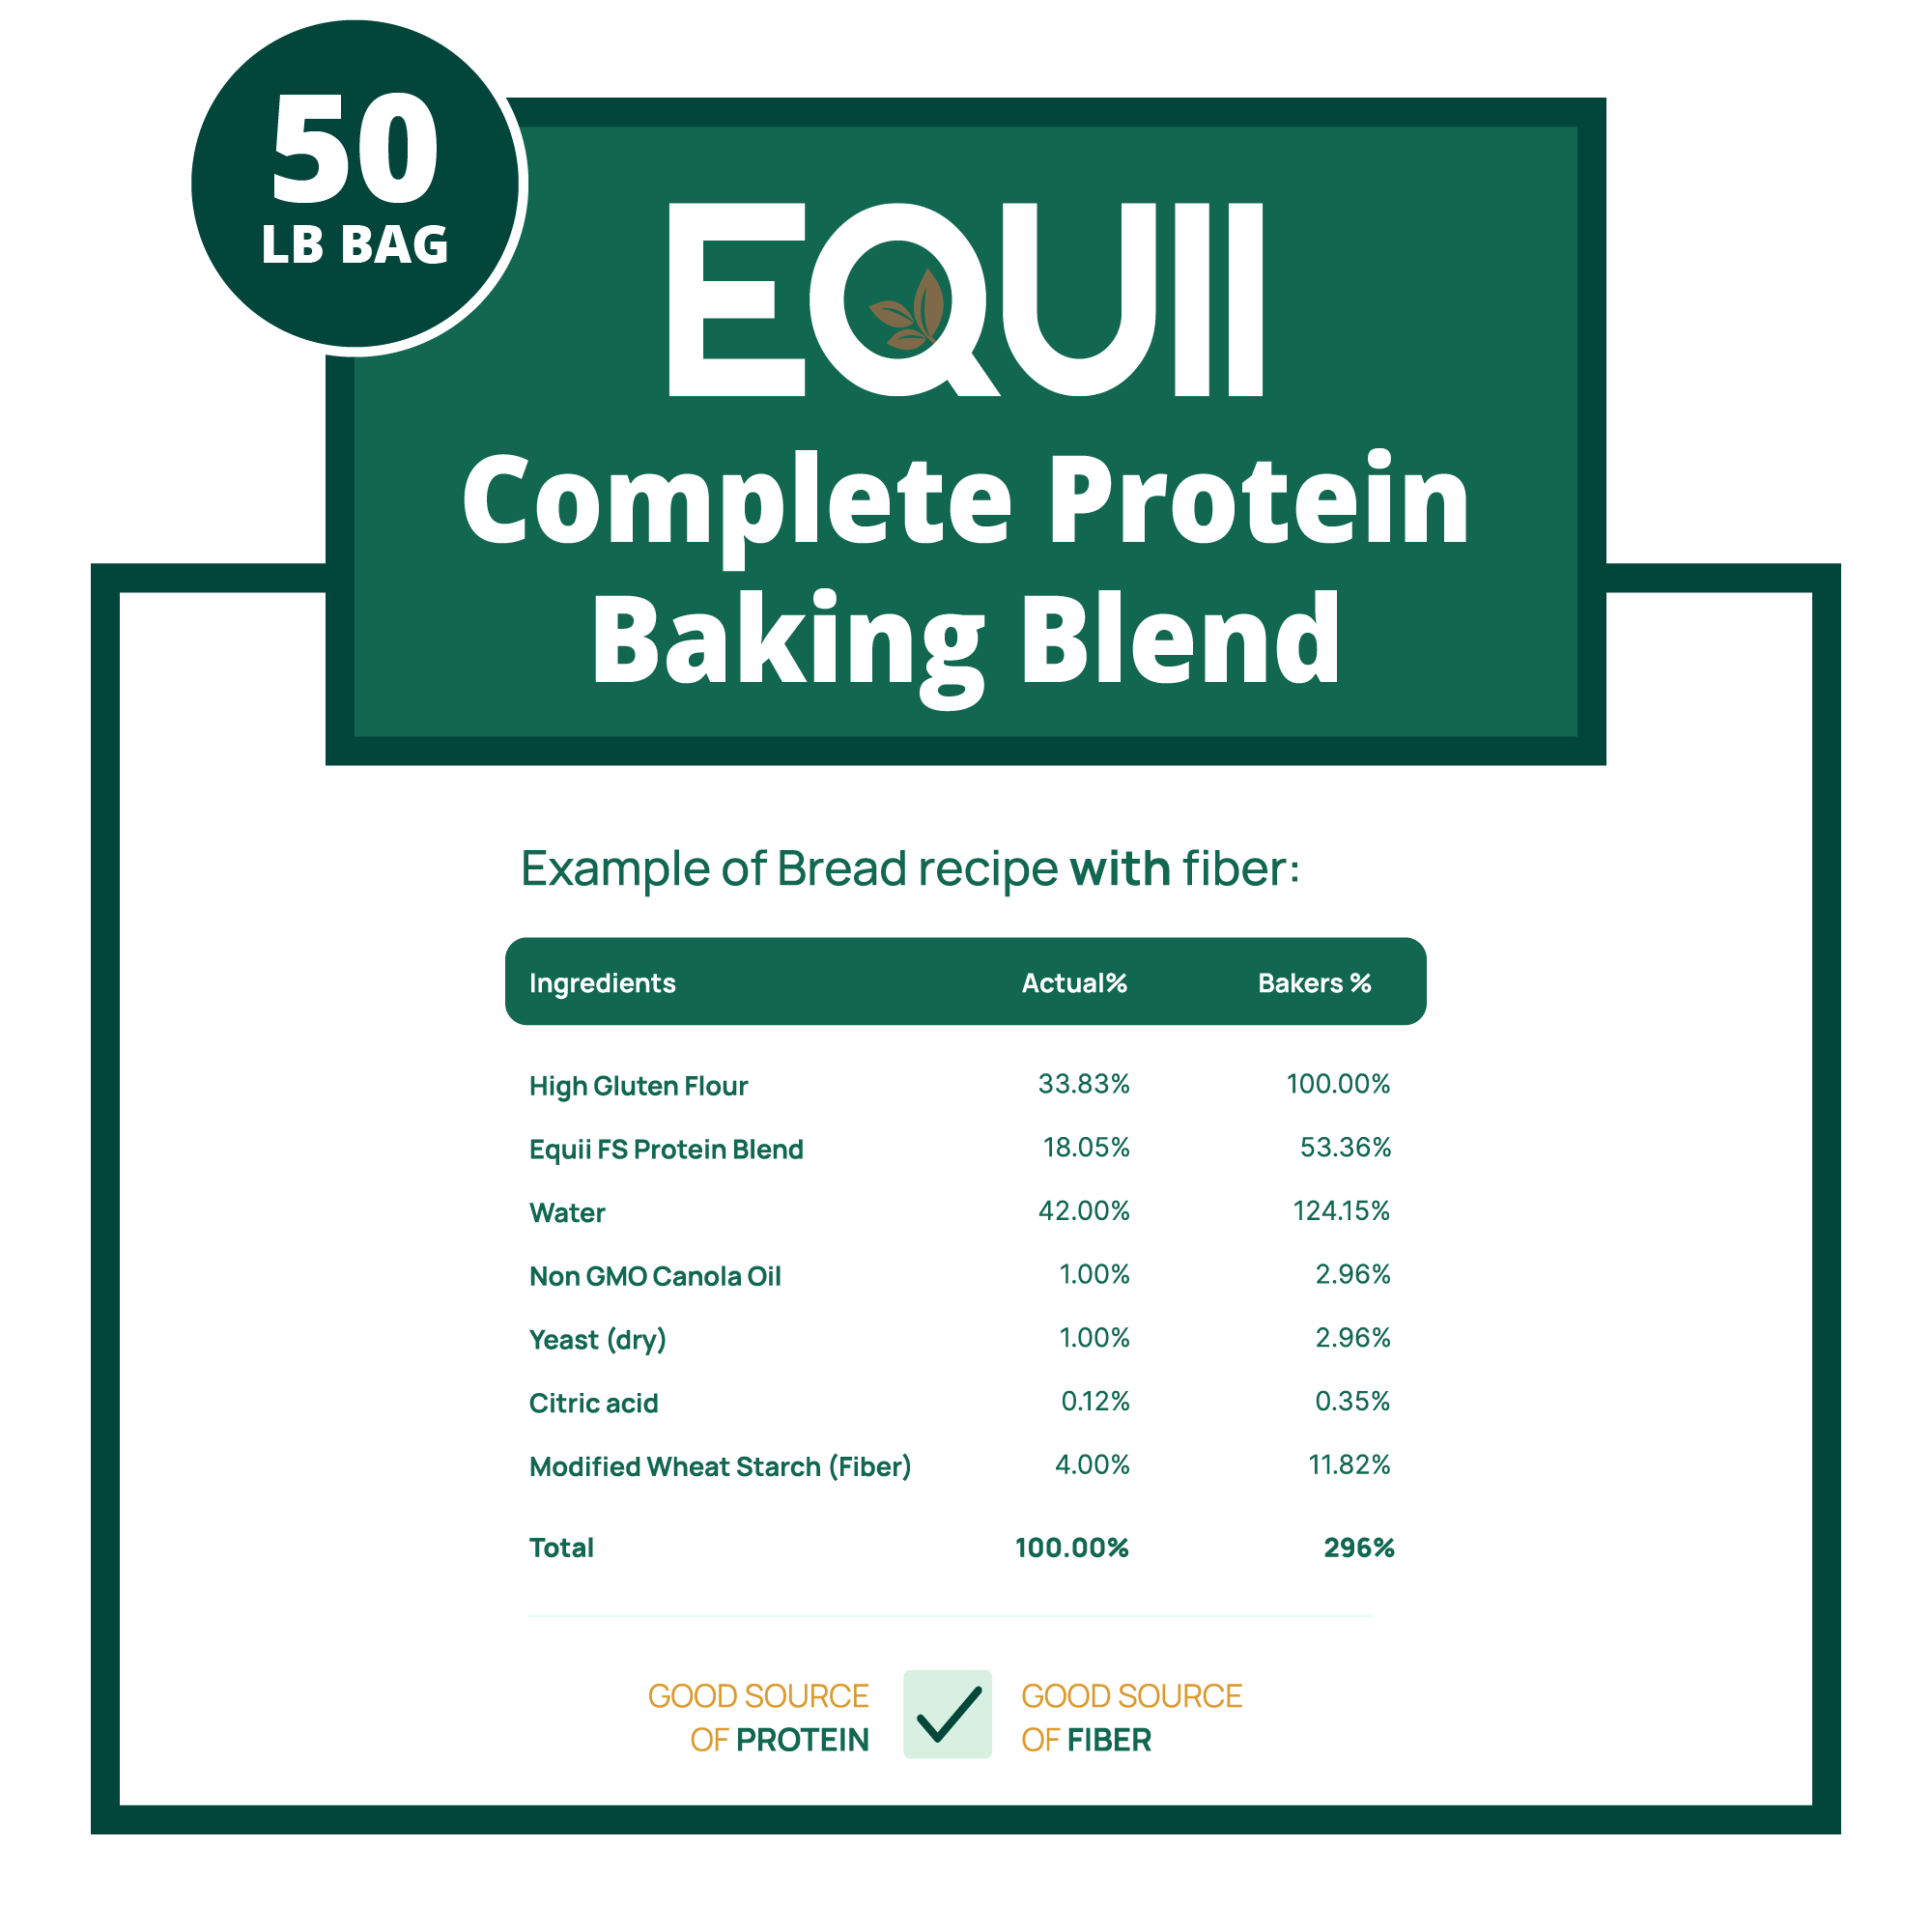 Complete Protein Baking Blend